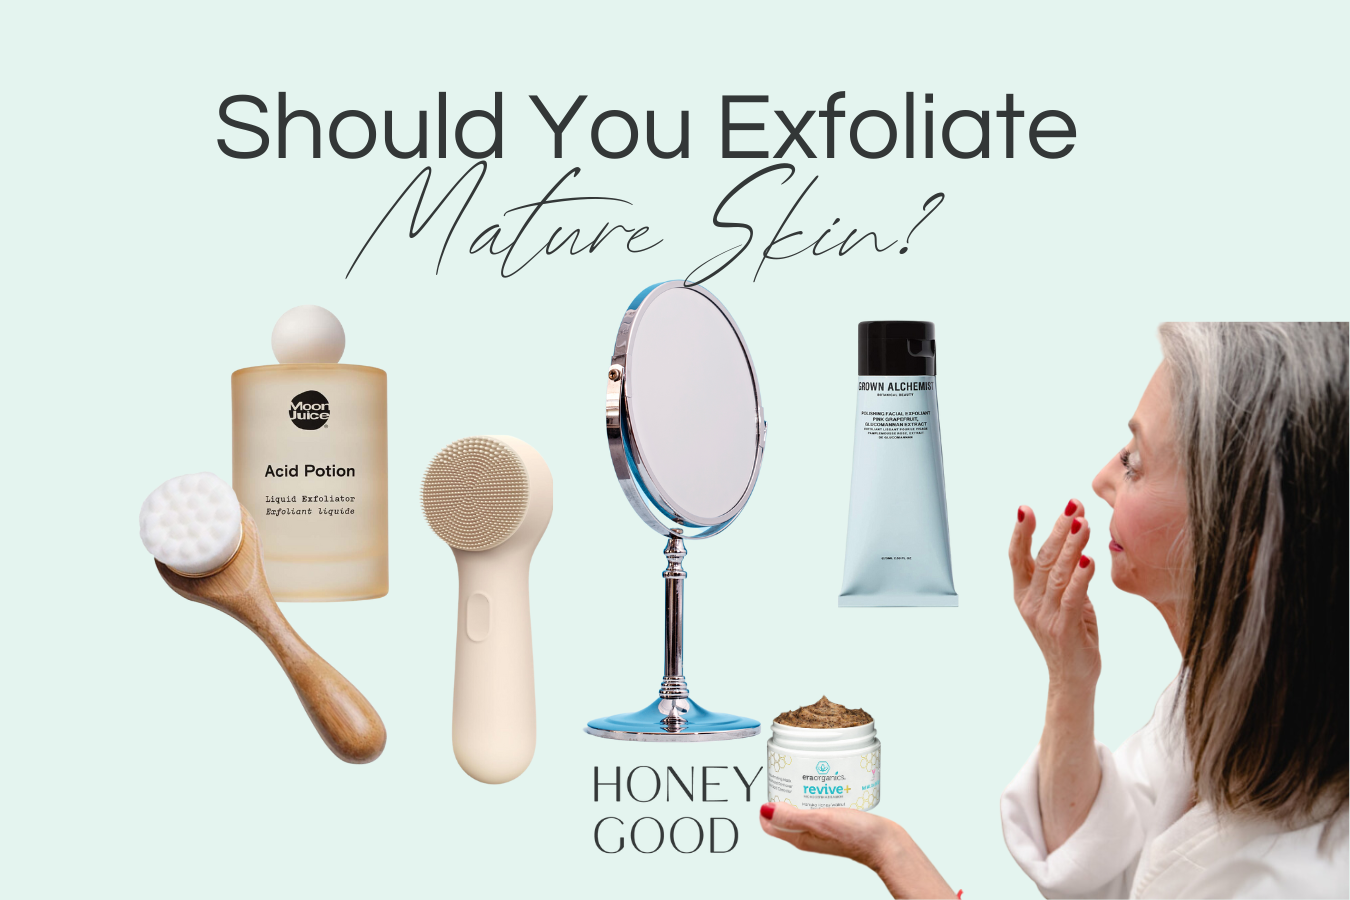 Image of exfoliation products for aging skin and the text, "should you exfoliate mature skin?"